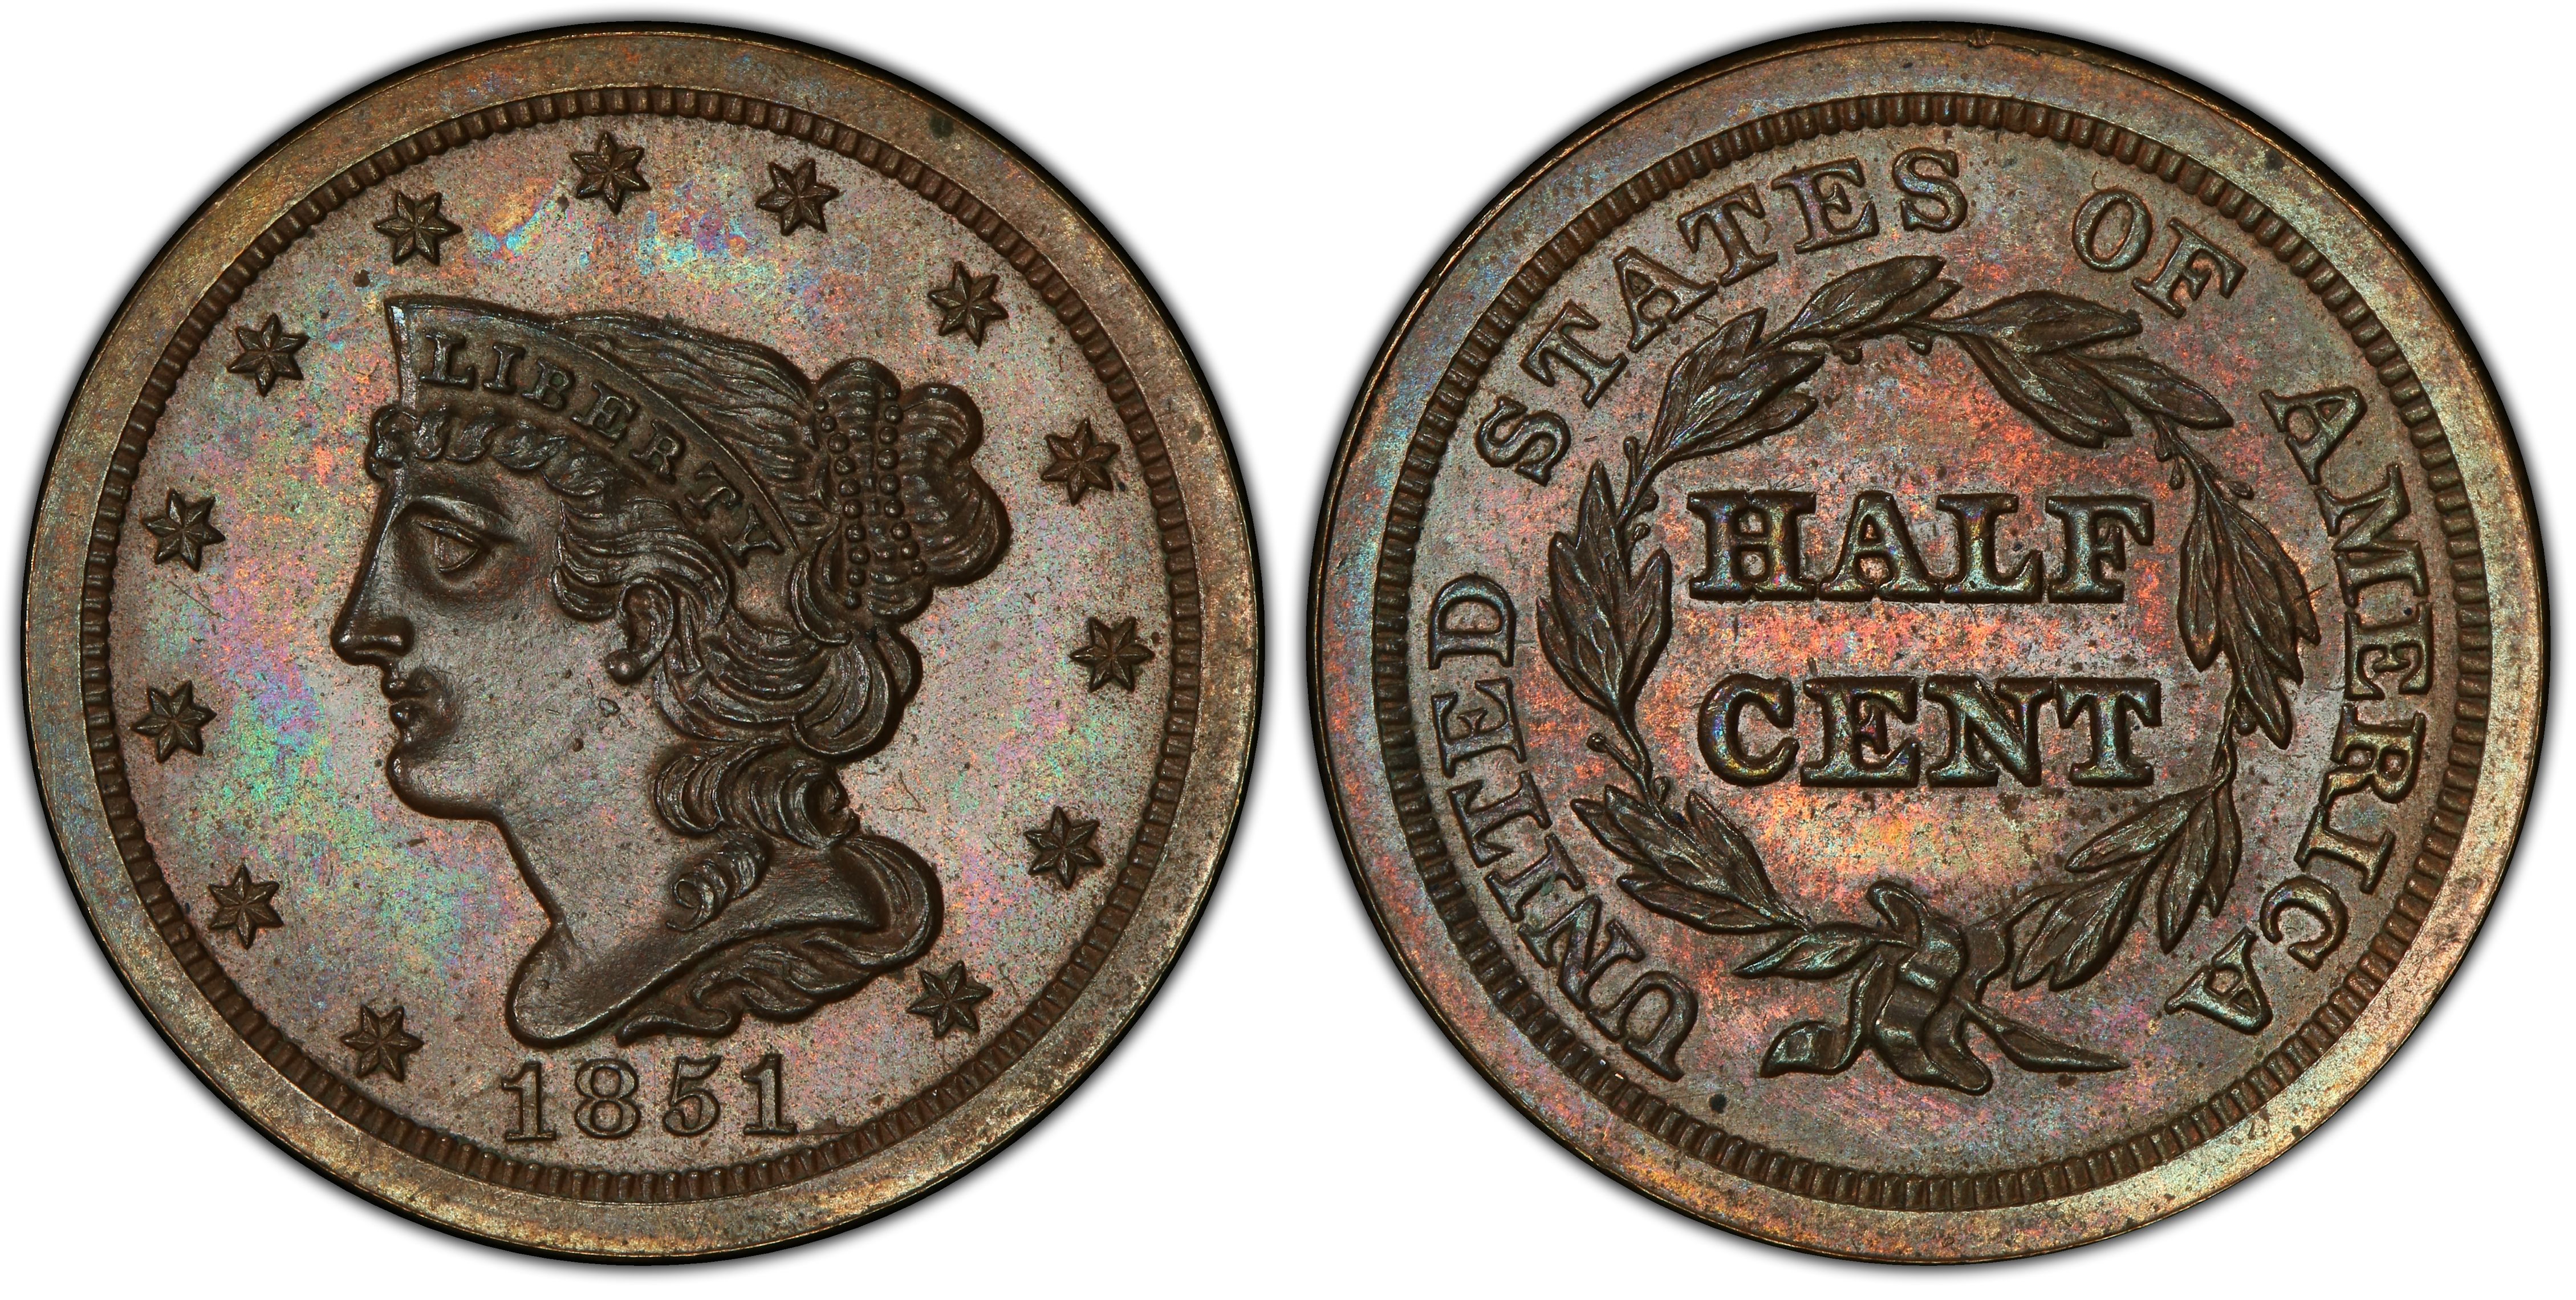 1855 1/2C, RD (Proof) Braided Hair Half Cent - PCGS CoinFacts